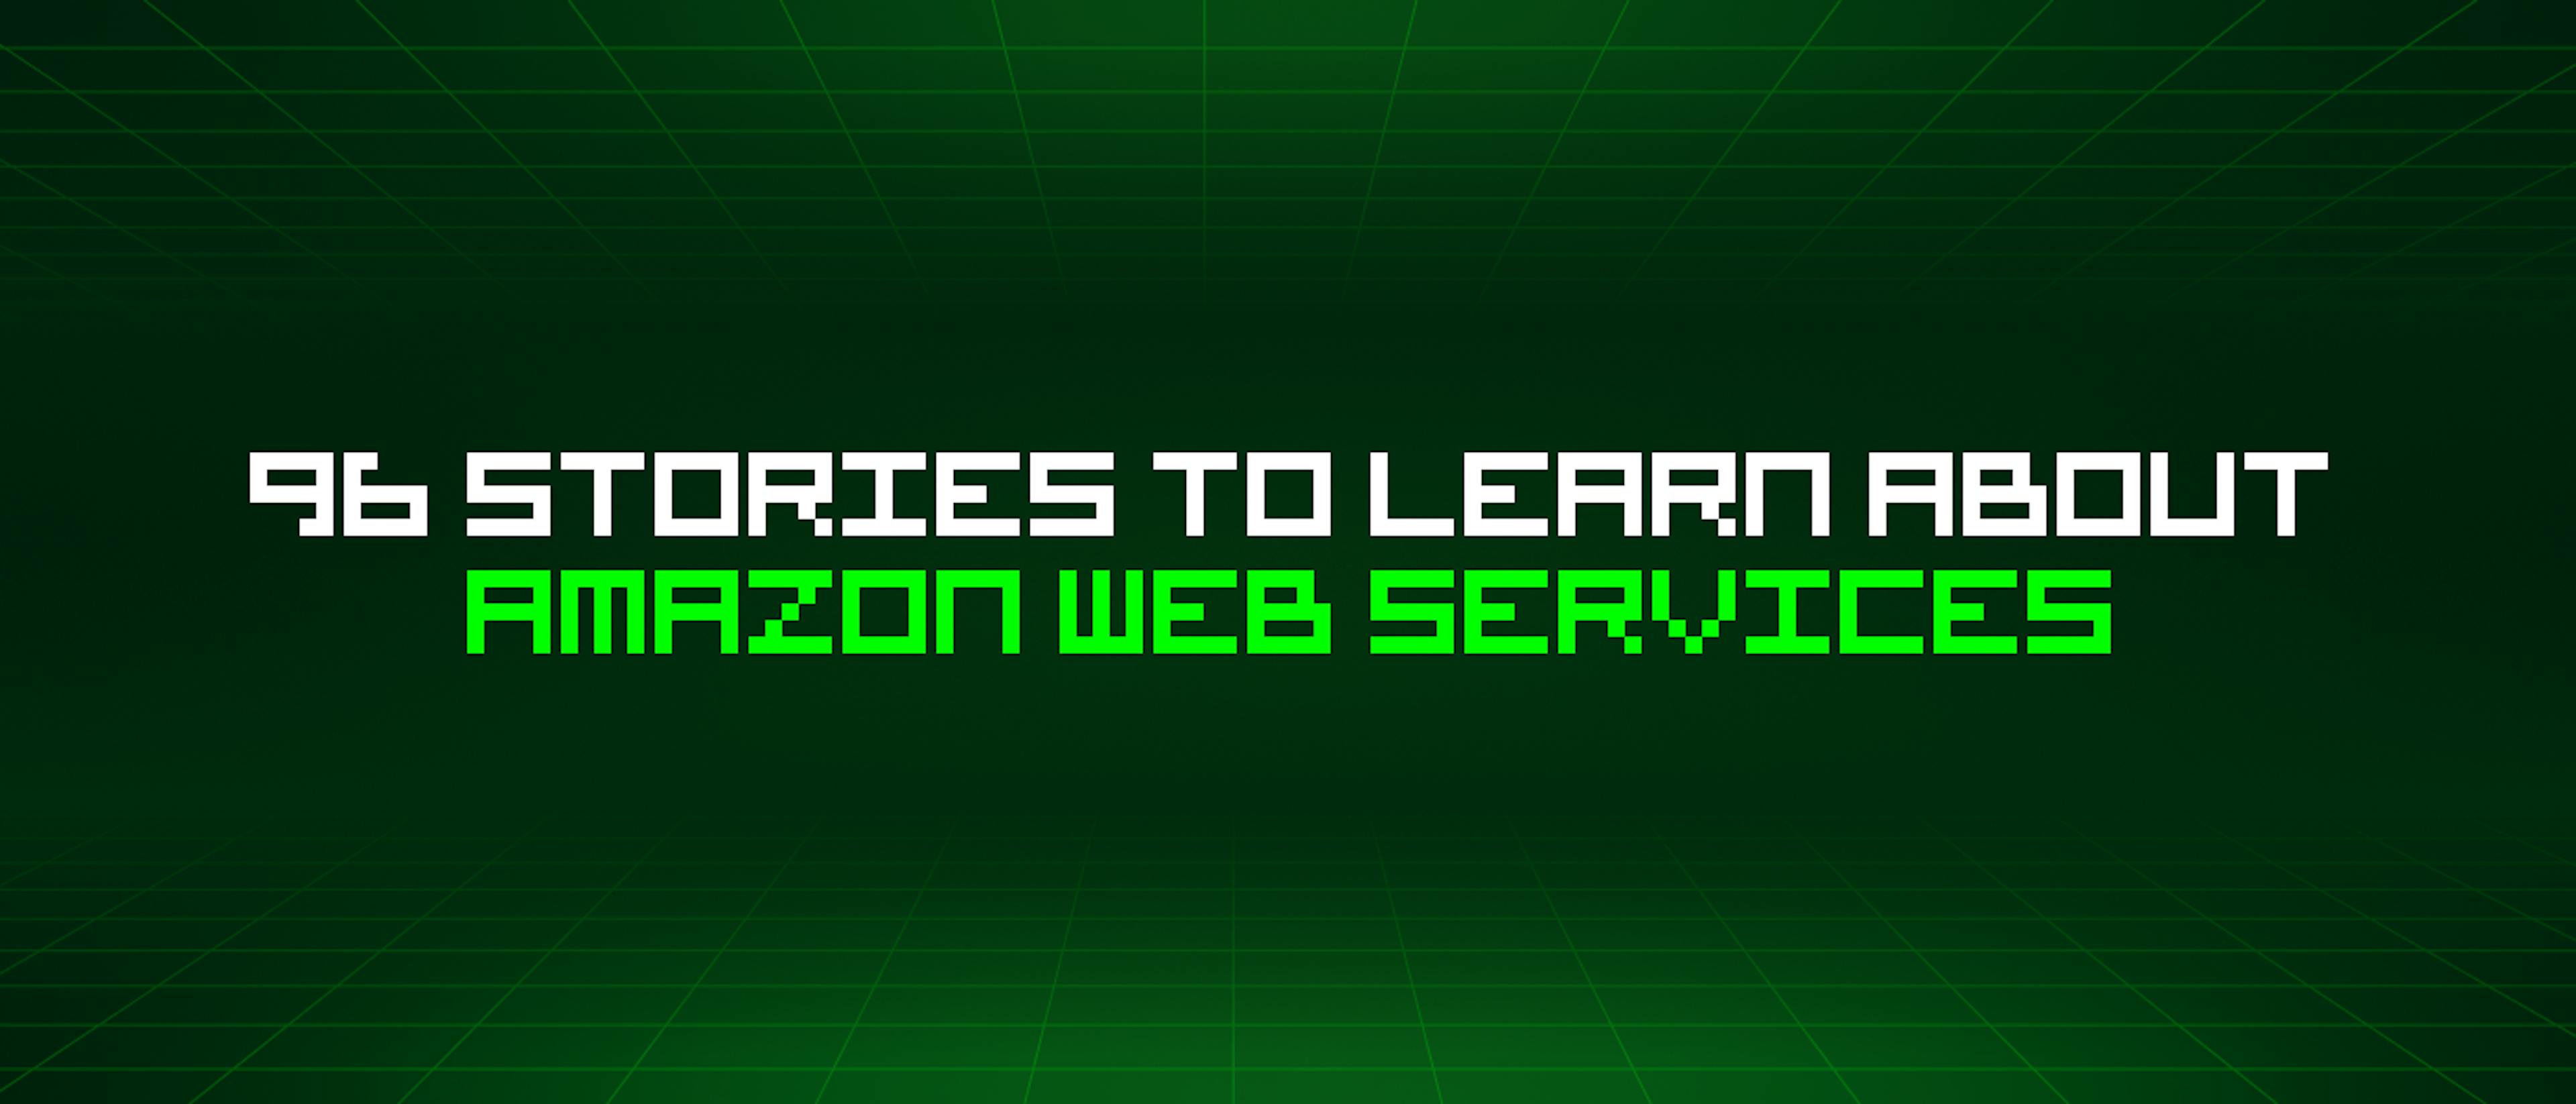 featured image - 96 Stories To Learn About Amazon Web Services